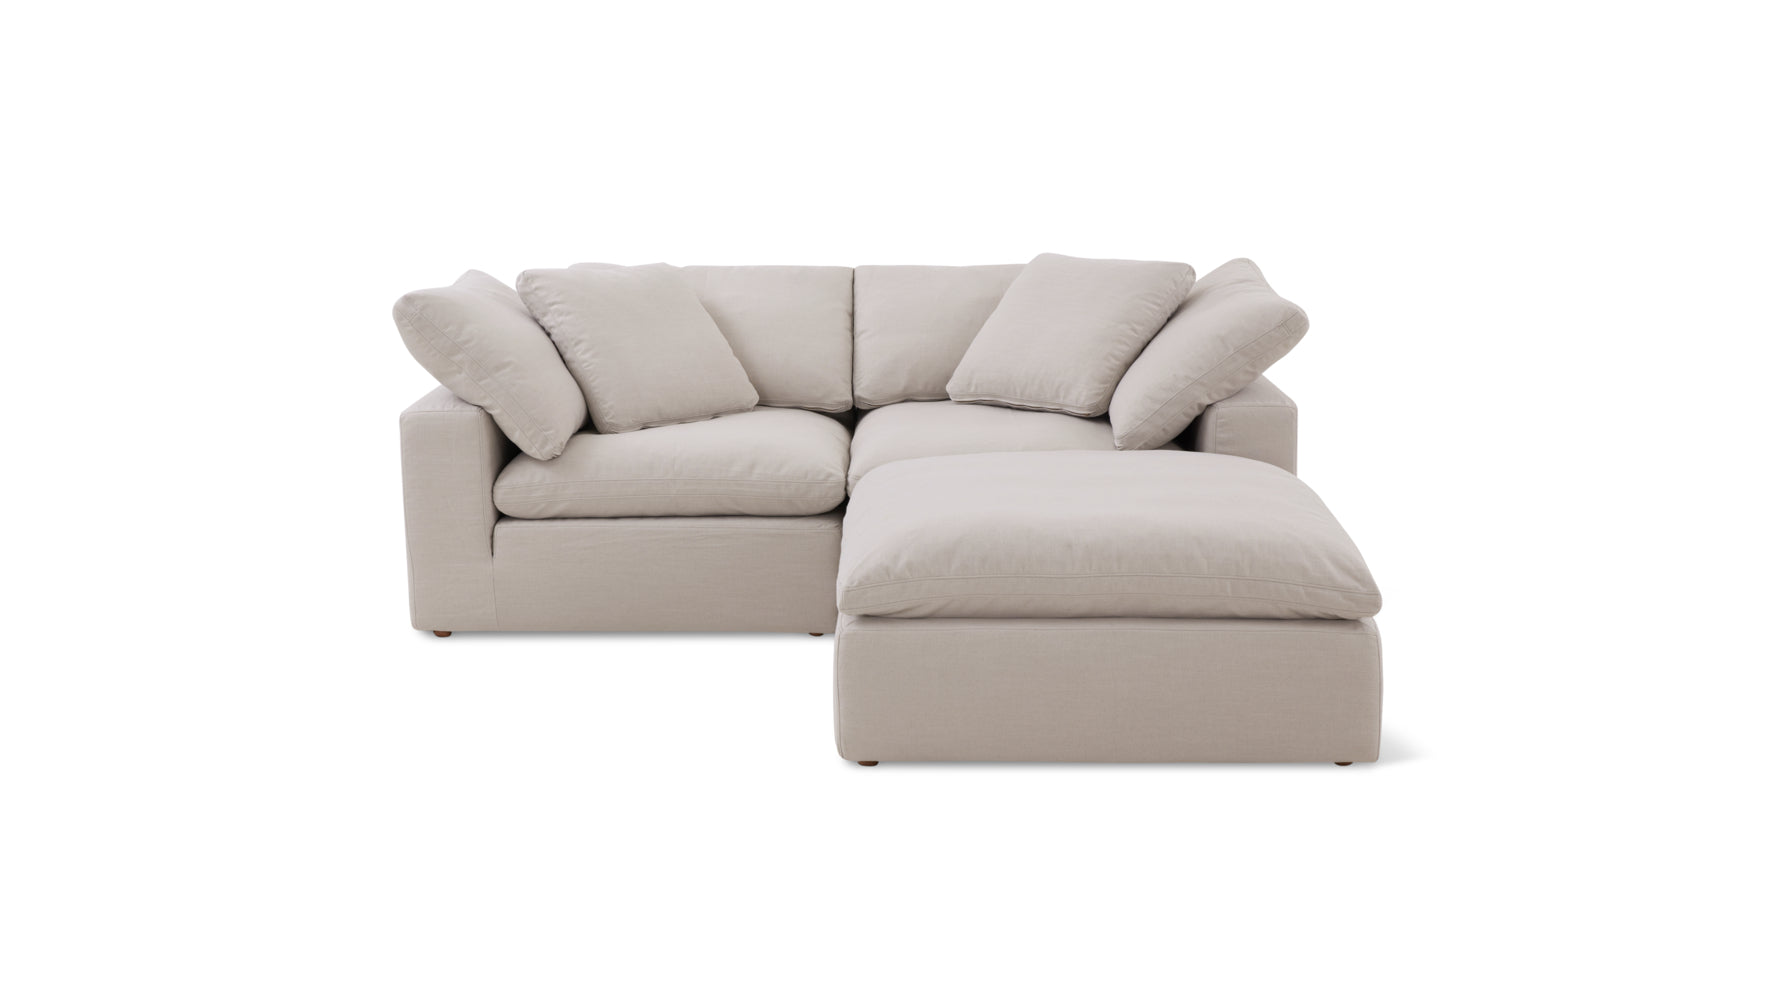 Movie Night™ 3-Piece Modular Sectional, Large, Clay - Image 1